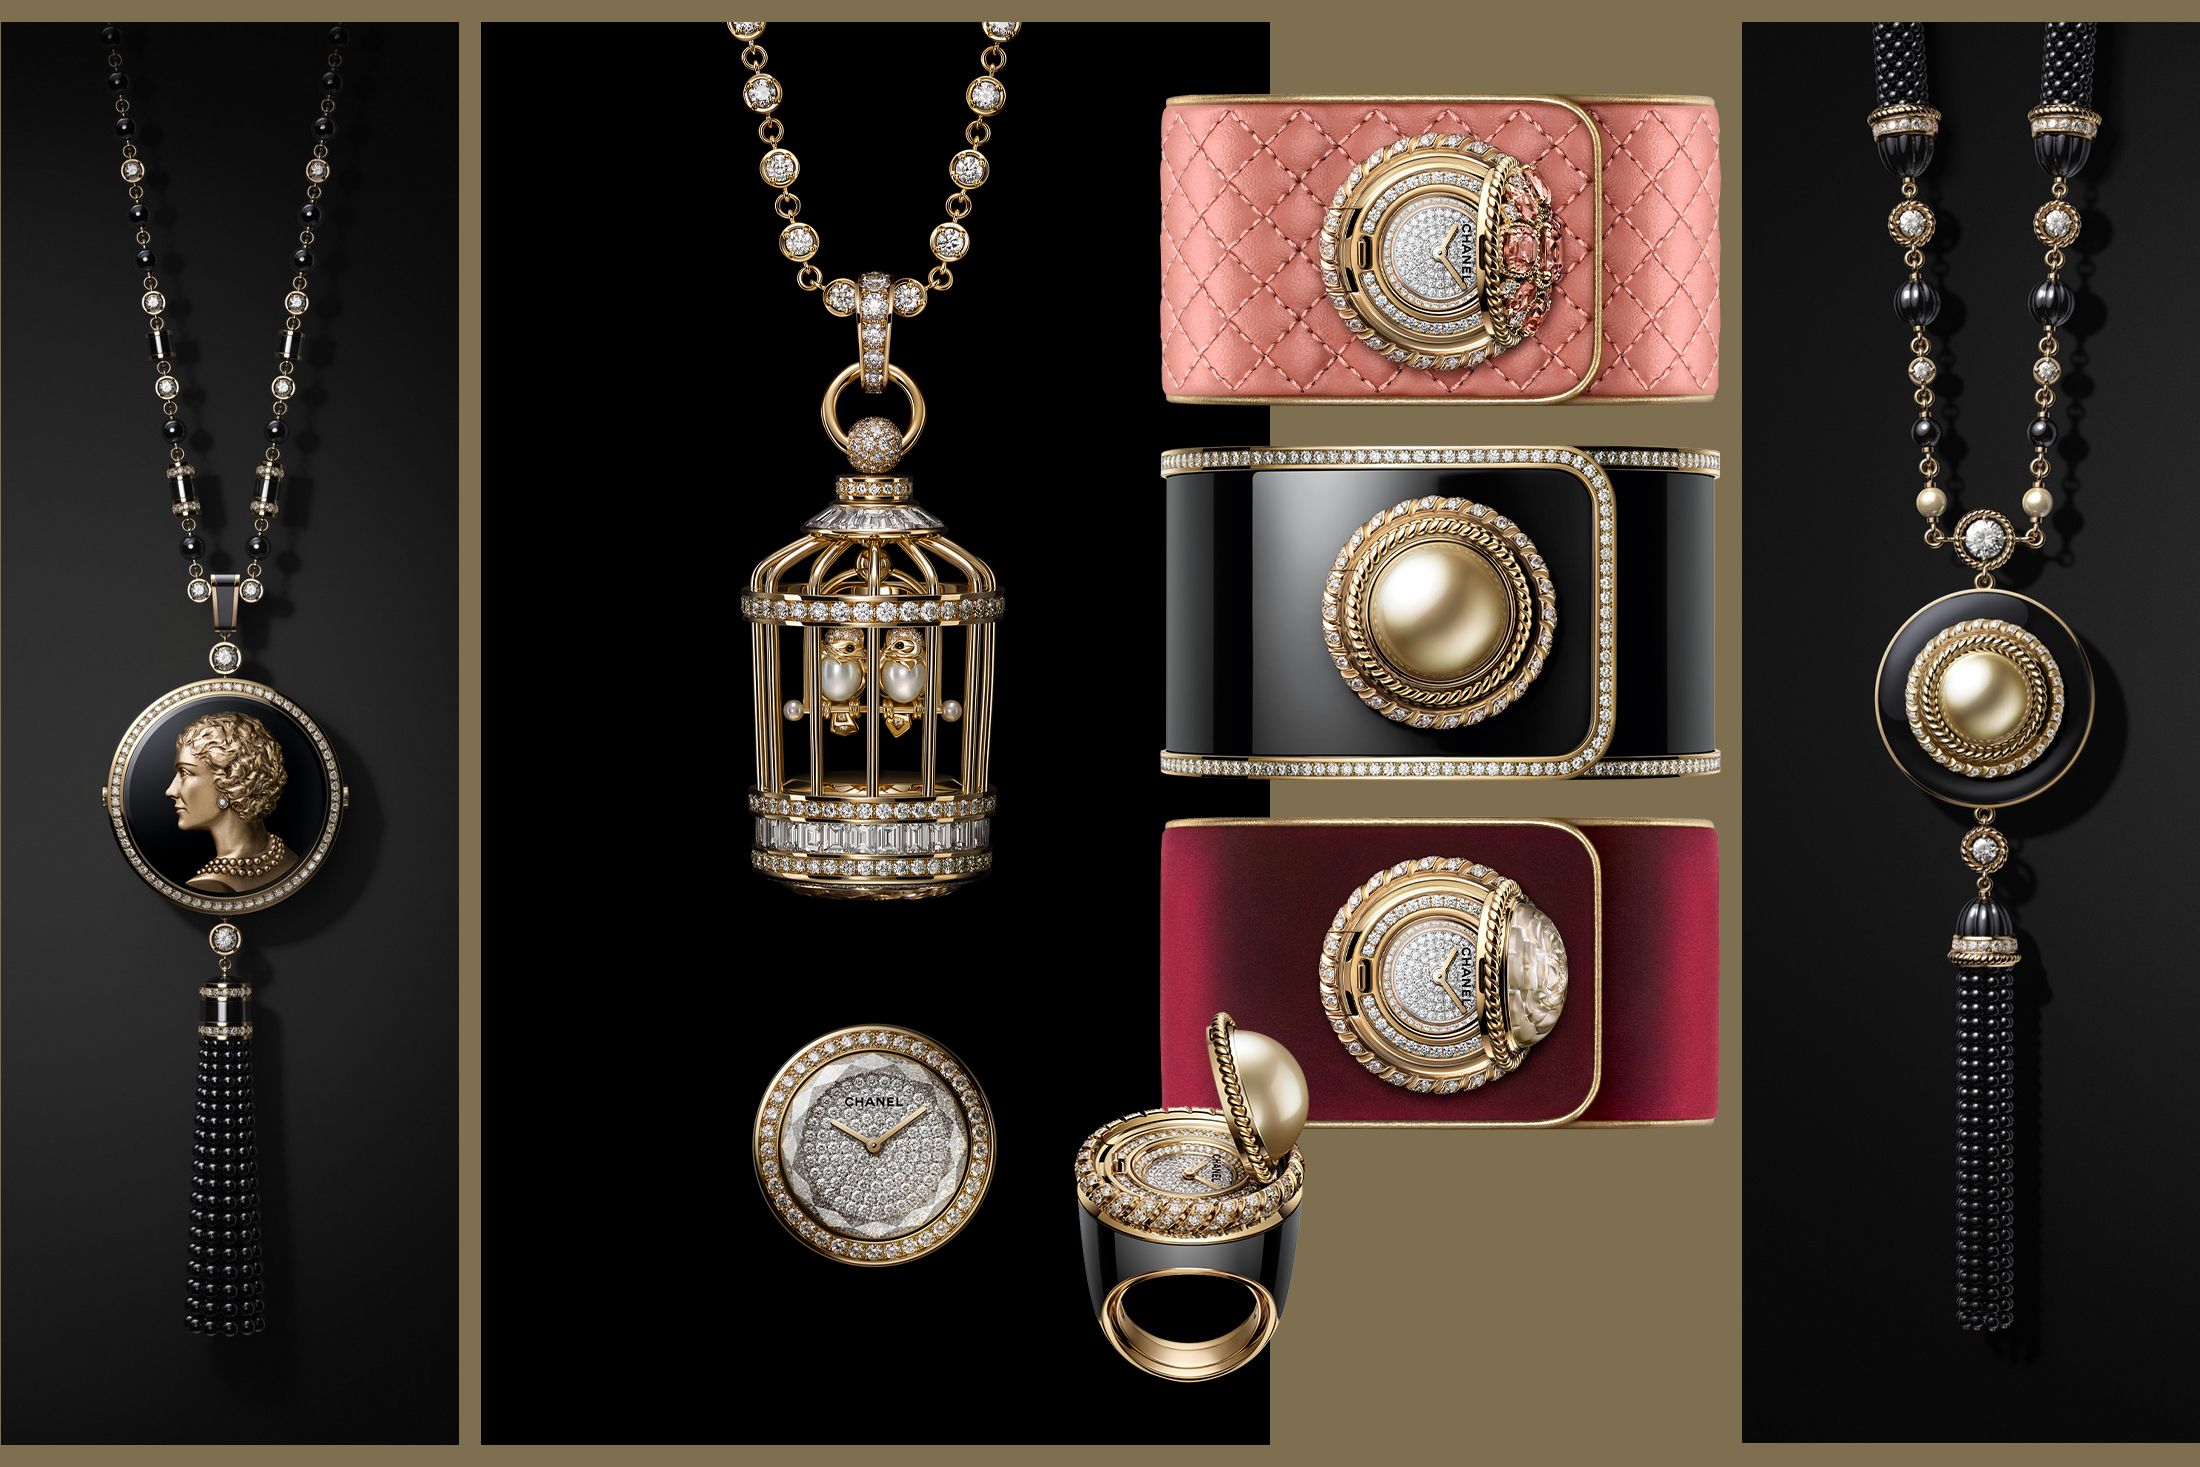 Chanel Mademoiselle Privé Bouton: More Than Meets the Eye